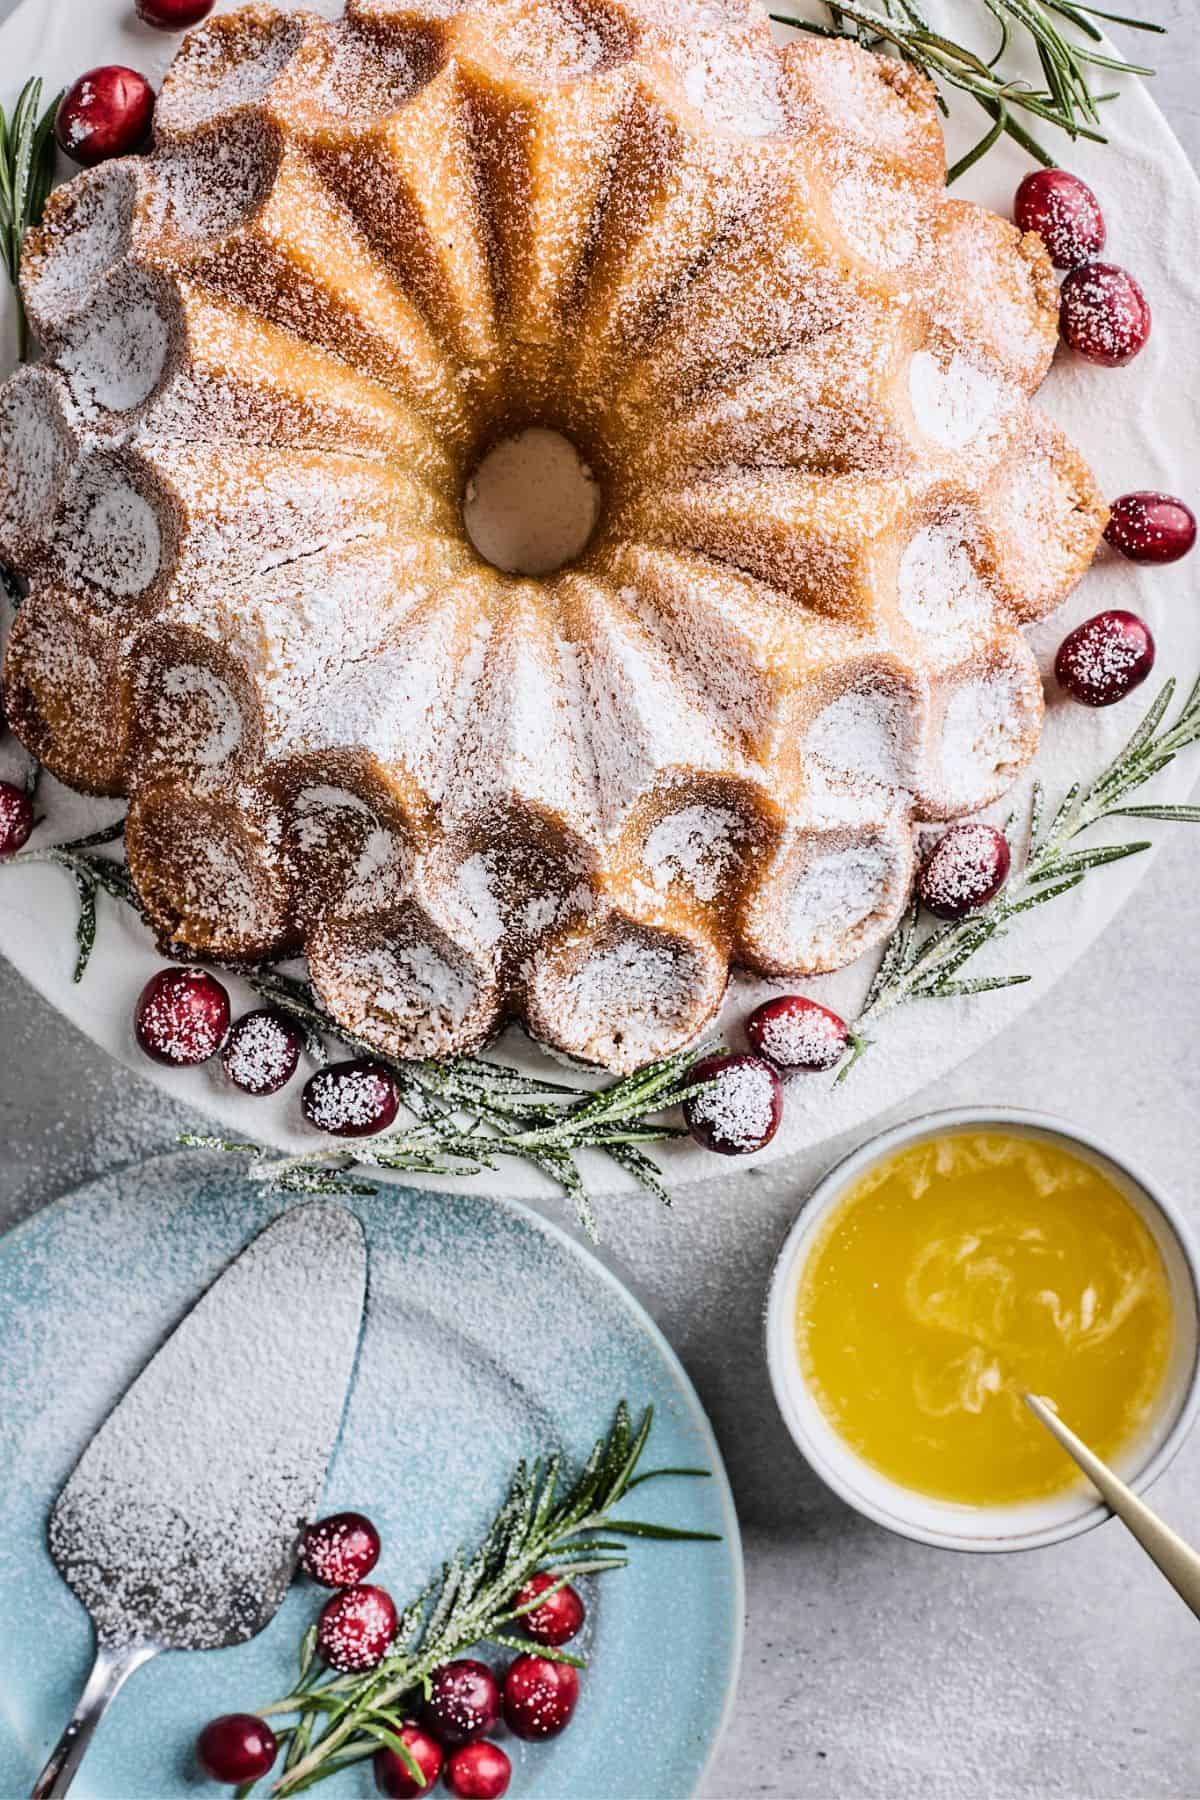 A buttered rum eggnog cake on a white plate dusted with powdered sugar and a bowl of sauce on the side.